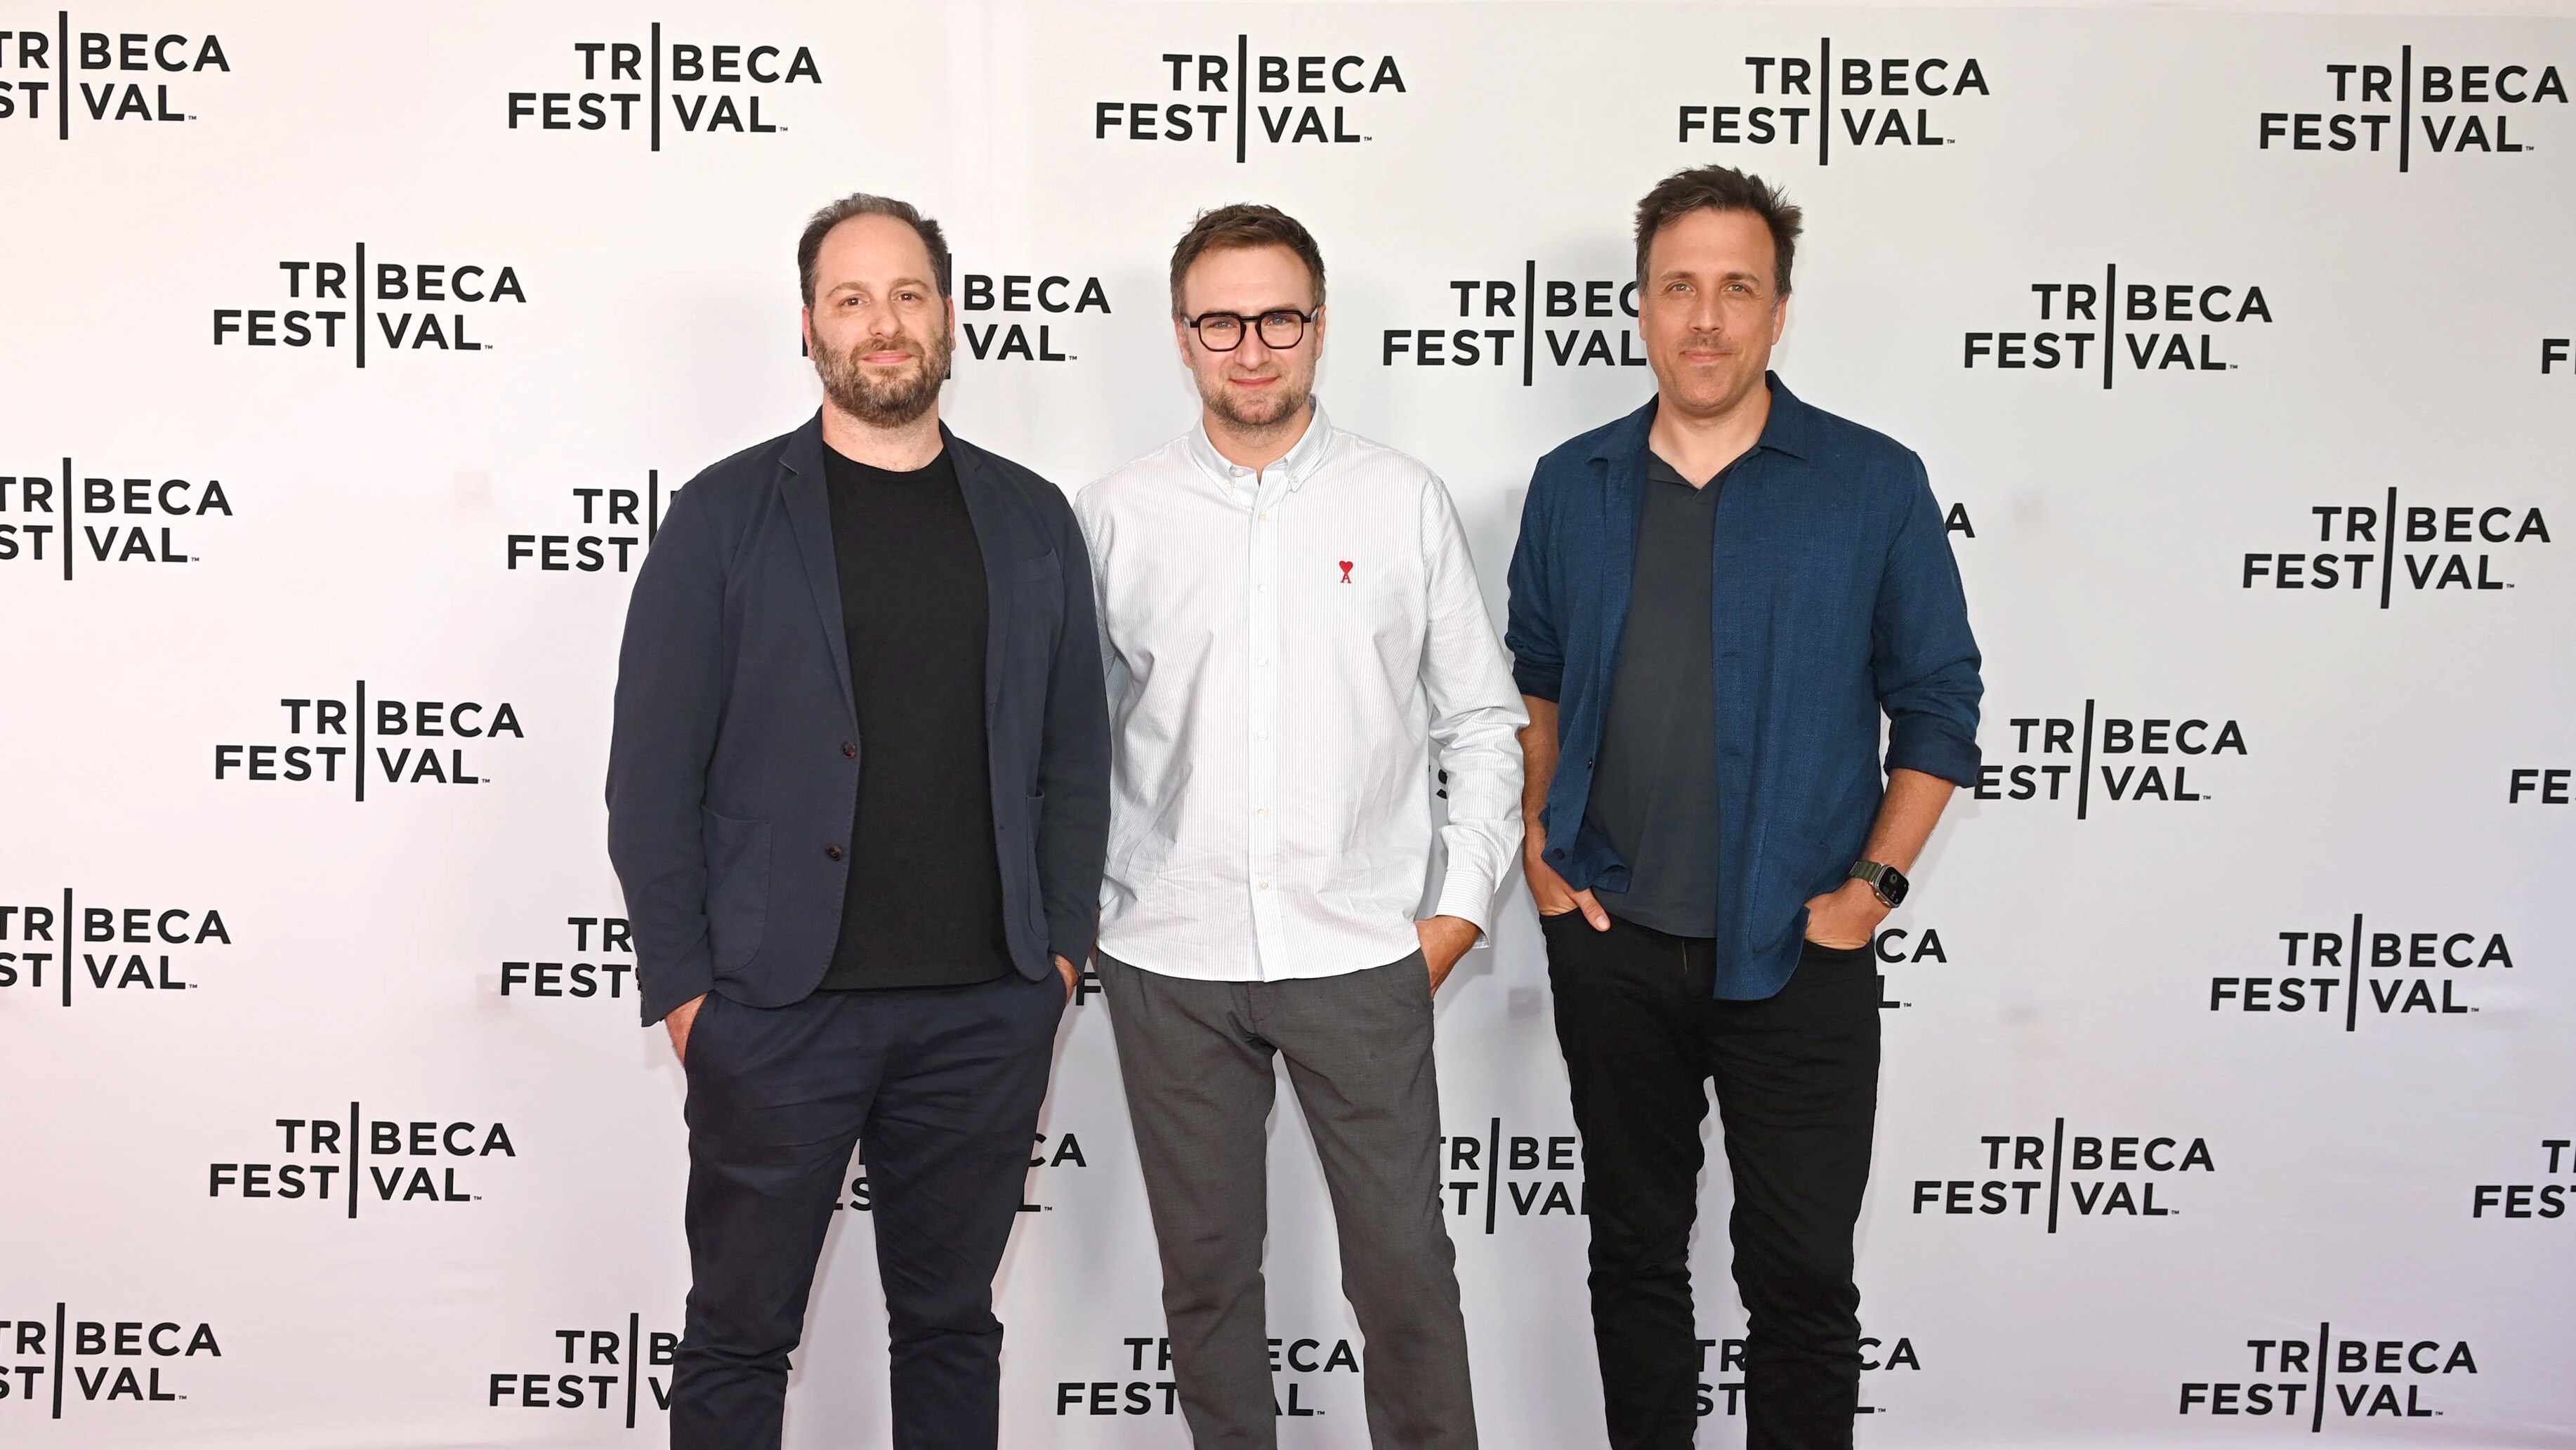 Disney+ Releases Photos From Marvel Studios’ “Stan Lee” World Premiere At Tribeca Film Festival